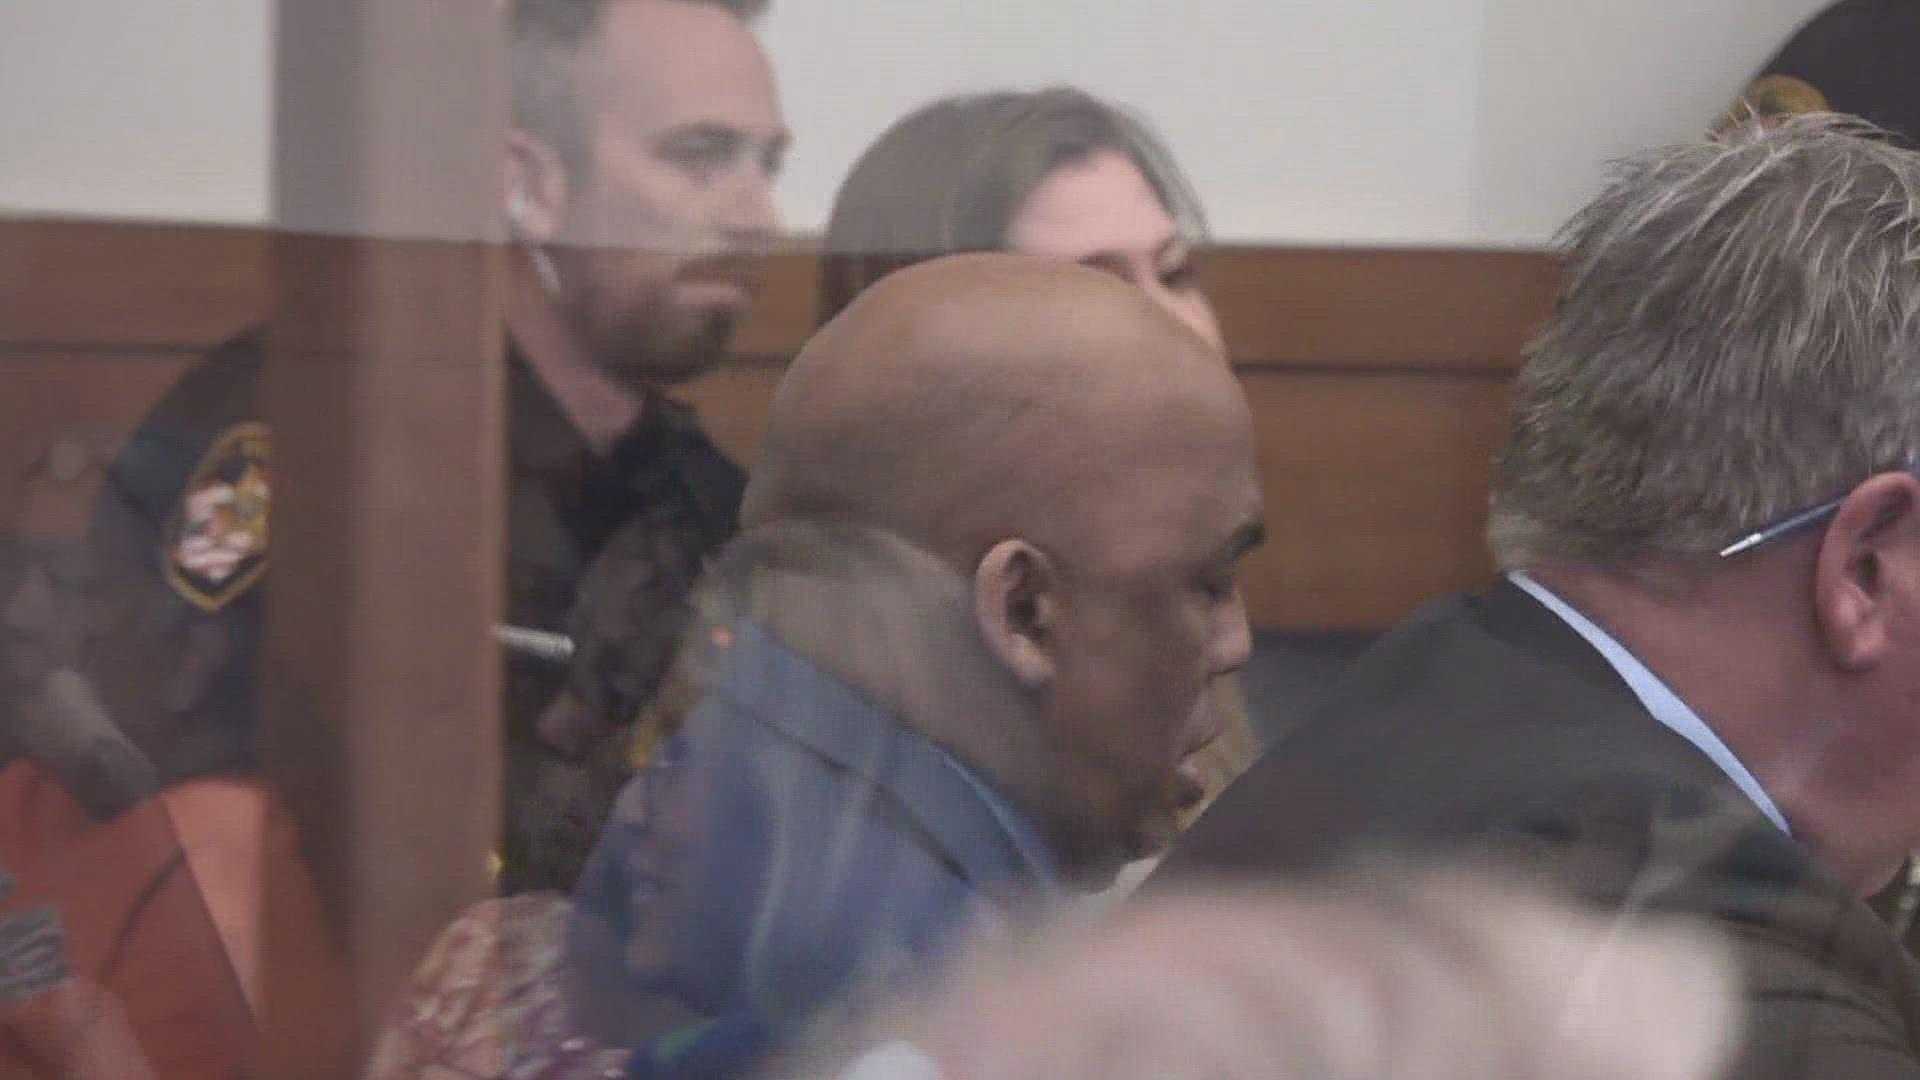 A jury has found a former Columbus police vice officer not guilty for the murder of a woman he shot while working undercover in 2018.